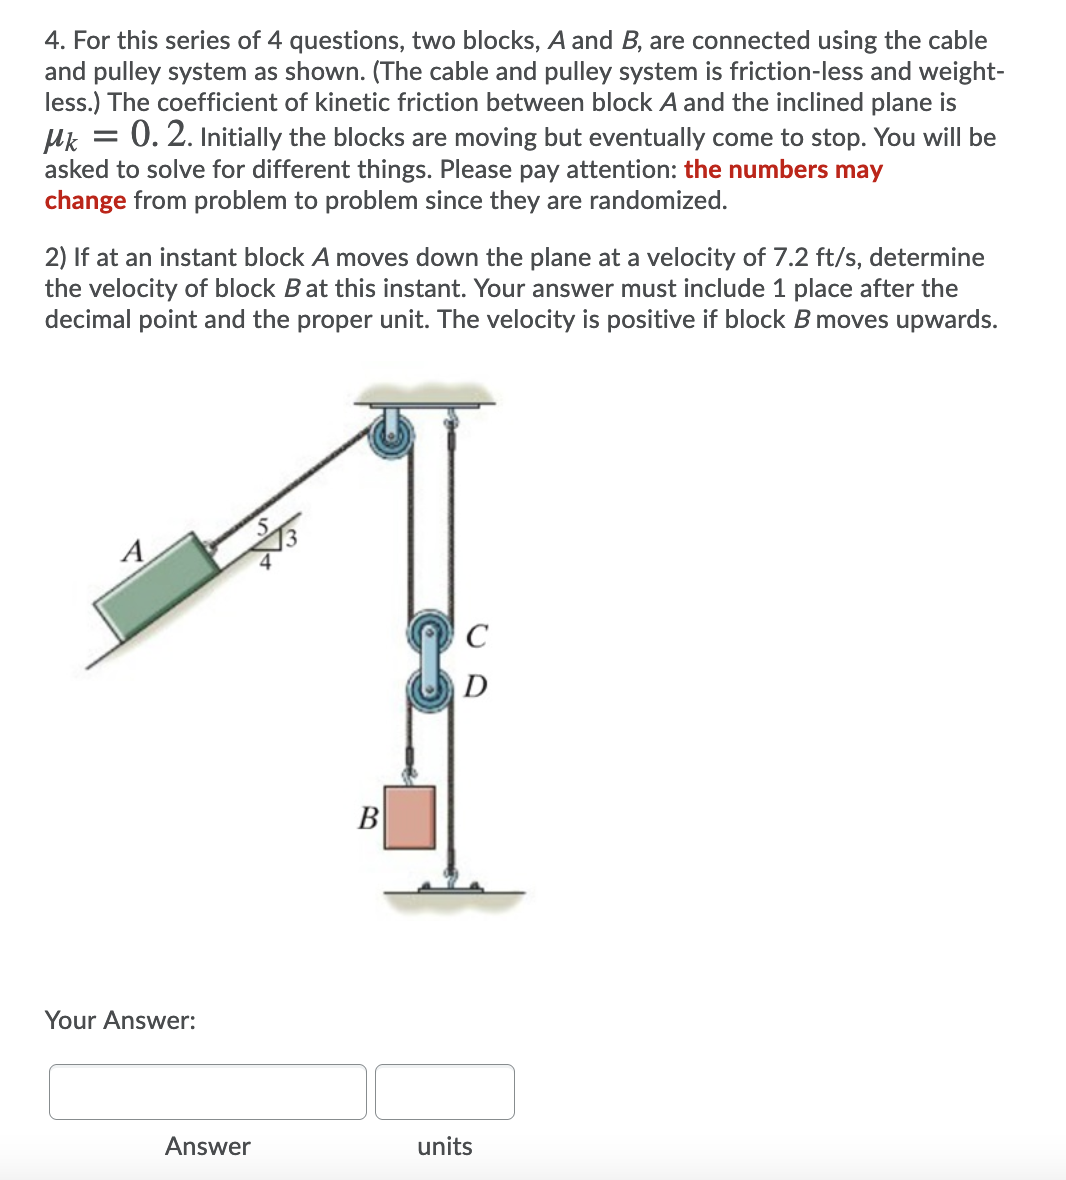 4. For this series of 4 questions, two blocks, A and B, are connected using the cable
and pulley system as shown. (The cable and pulley system is friction-less and weight-
less.) The coefficient of kinetic friction between block A and the inclined plane is
Uk = 0. 2. Initially the blocks are moving but eventually come to stop. You will be
asked to solve for different things. Please pay attention: the numbers may
change from problem to problem since they are randomized.
2) If at an instant block A moves down the plane at a velocity of 7.2 ft/s, determine
the velocity of block Bat this instant. Your answer must include 1 place after the
decimal point and the proper unit. The velocity is positive if block B moves upwards.
A
D
B
Your Answer:
Answer
units
